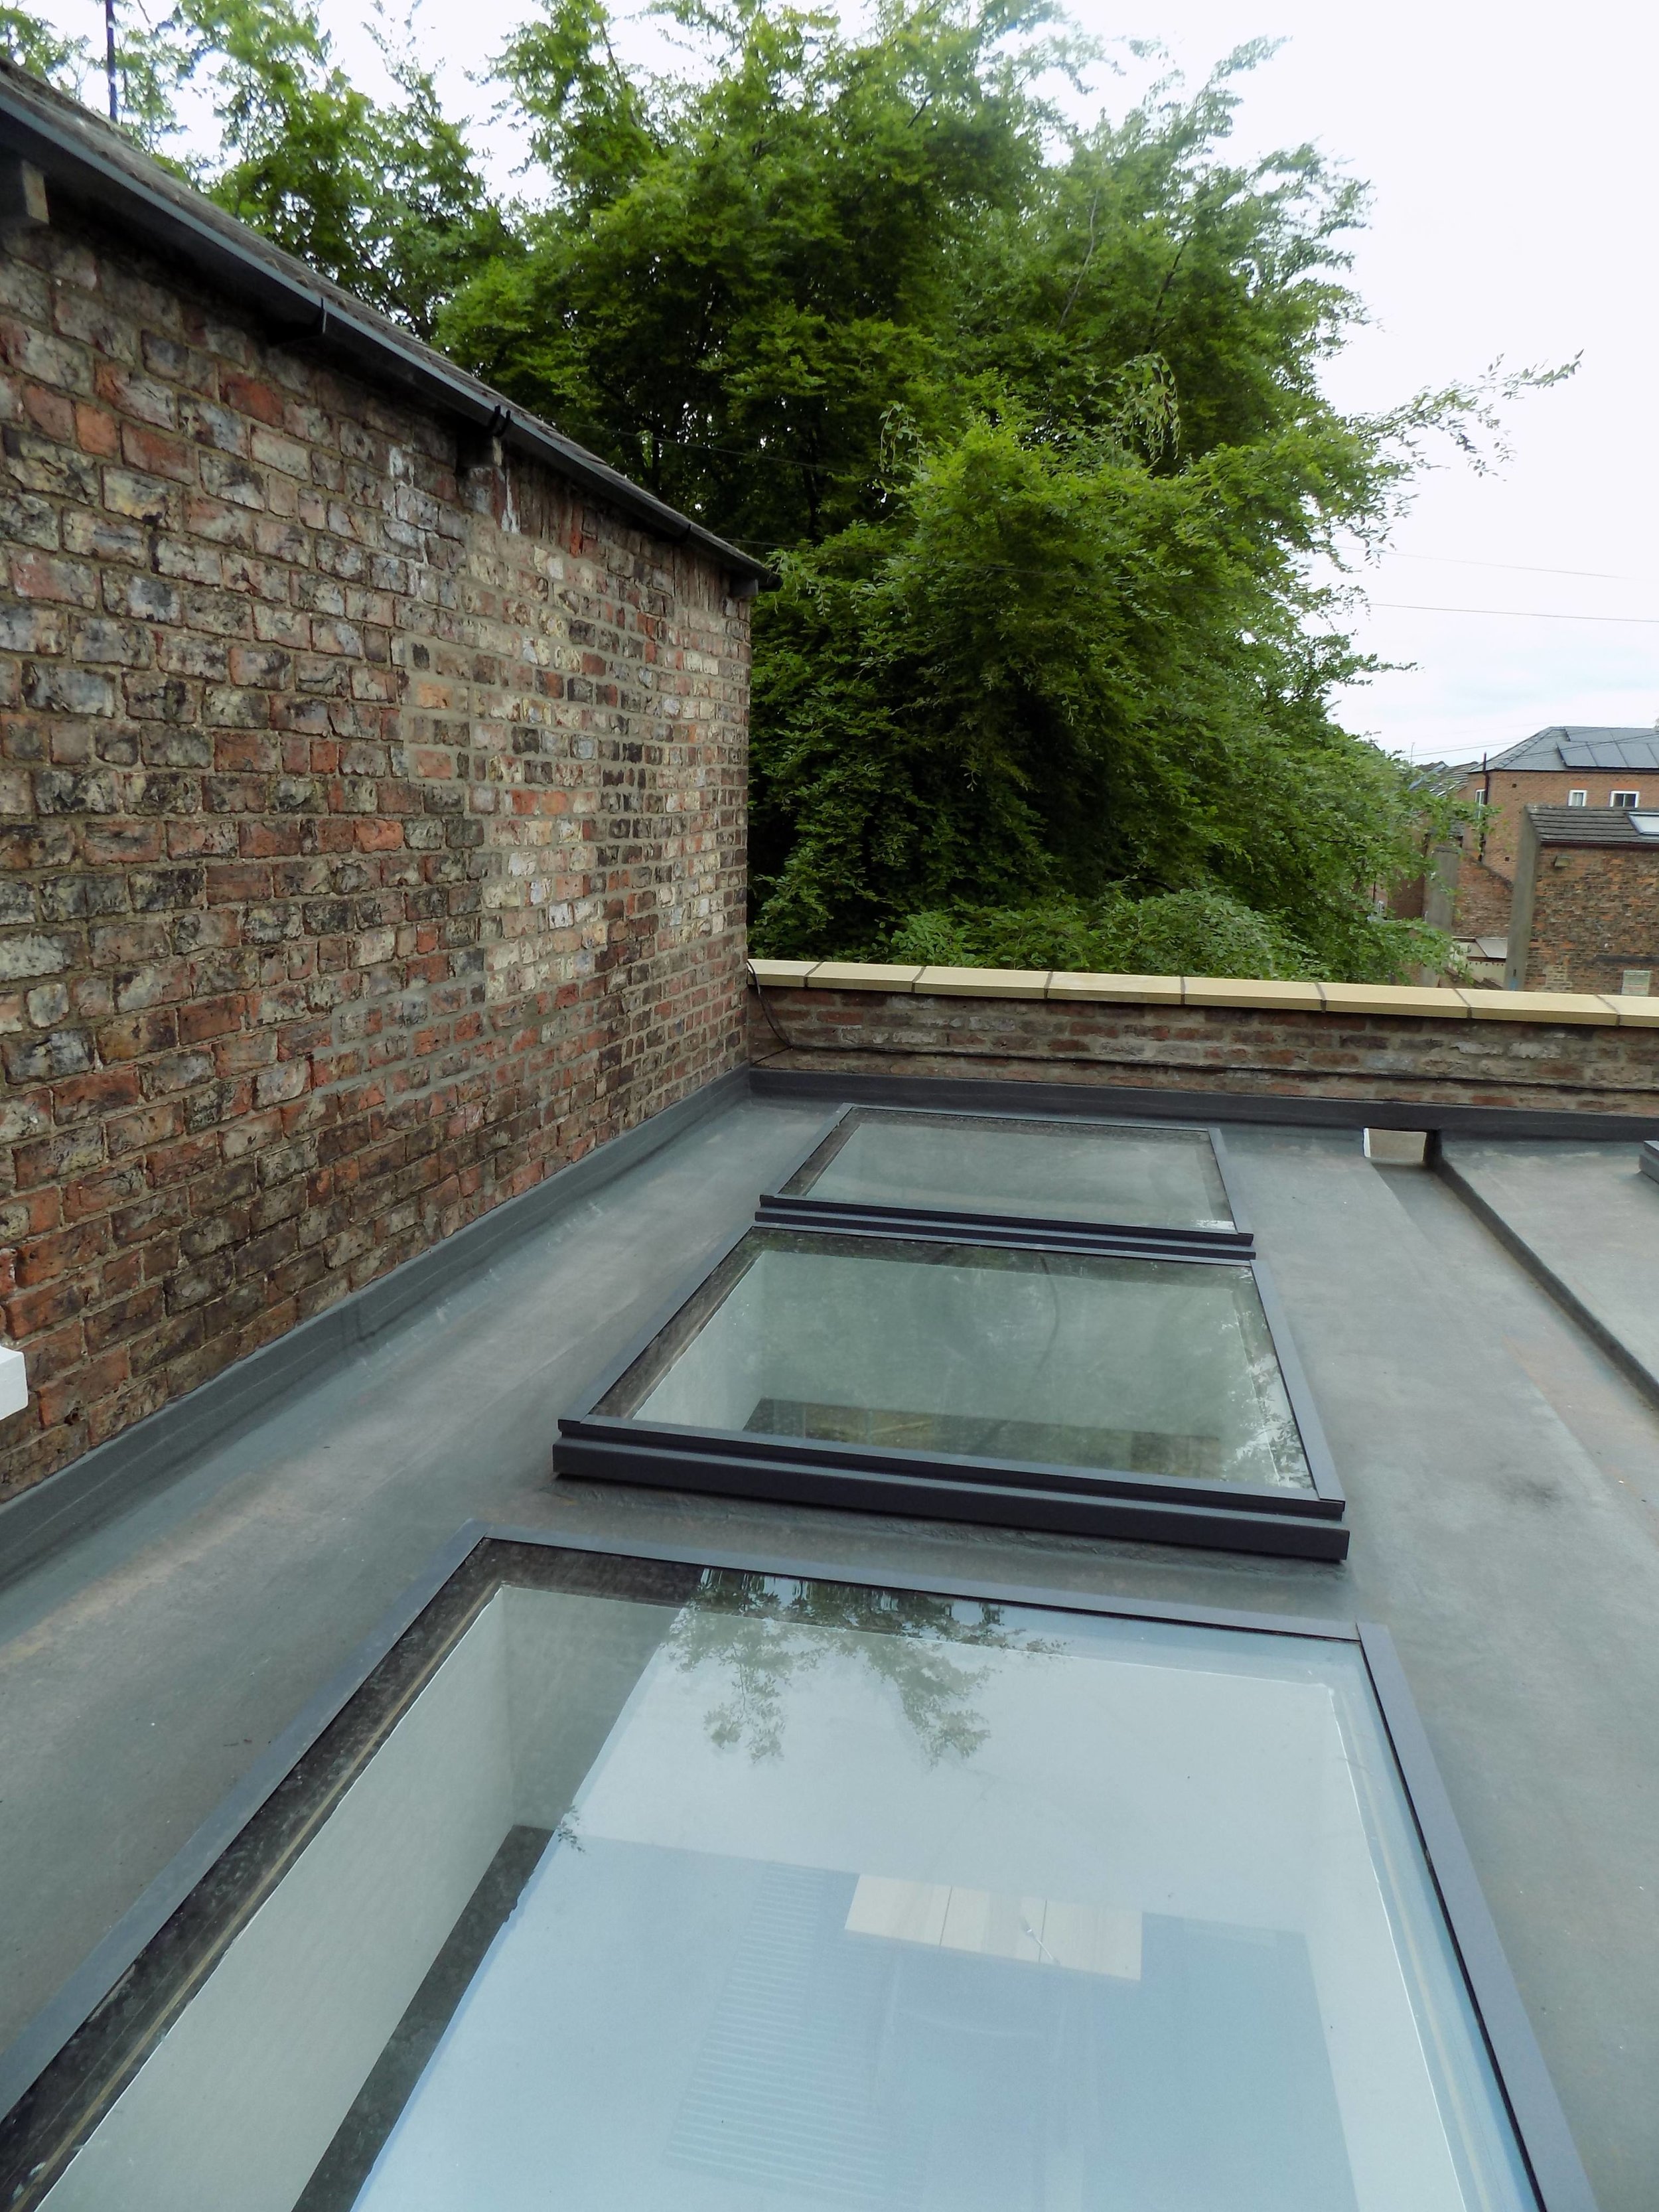 Roof View 02 - Holgate Town Hotel - York Architects - Samuel Kendall Associates